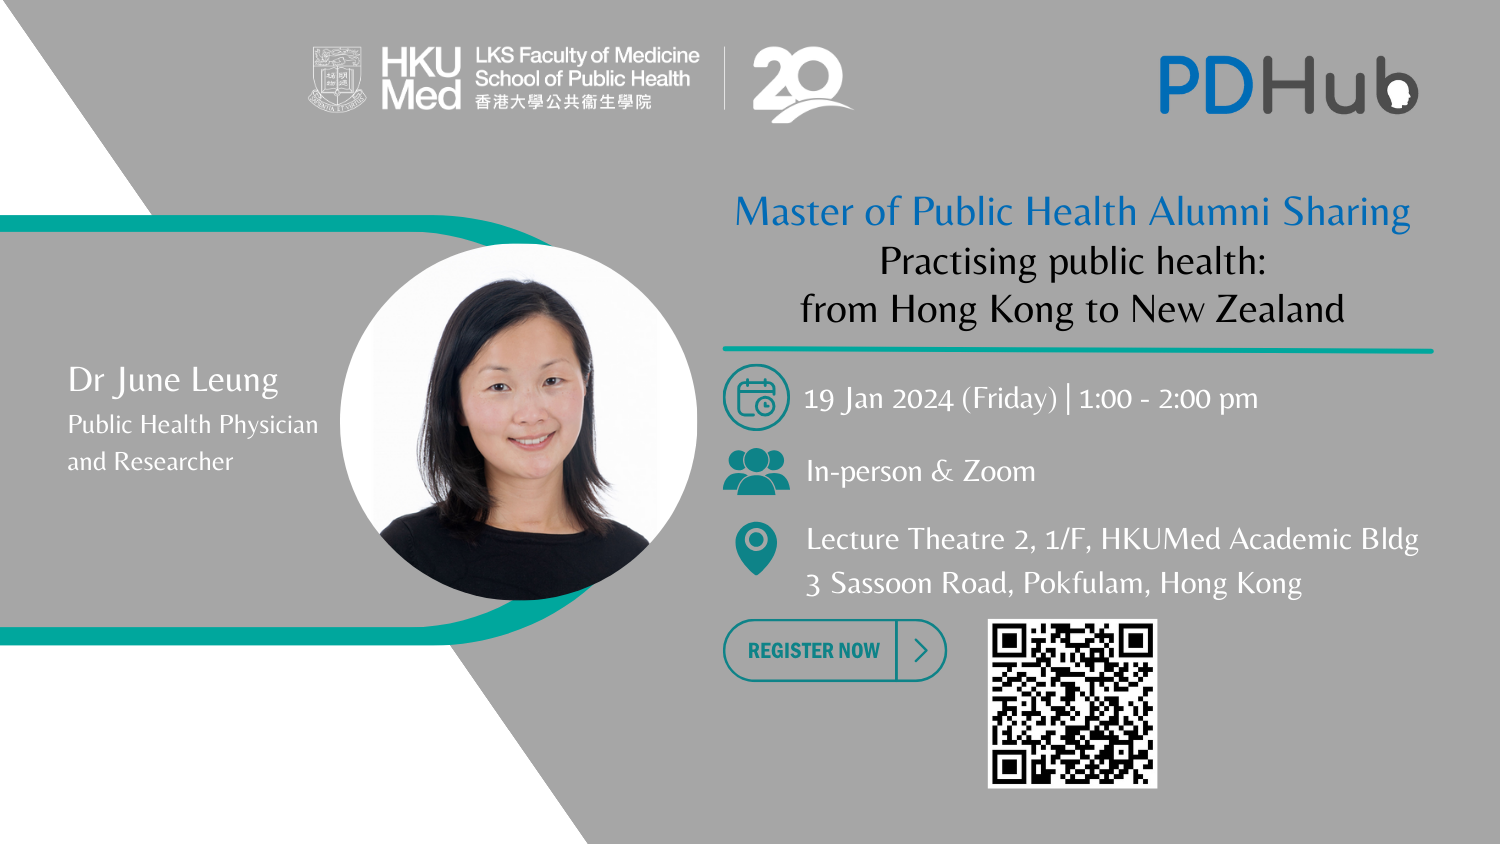 Practising public health: from Hong Kong to New Zealand